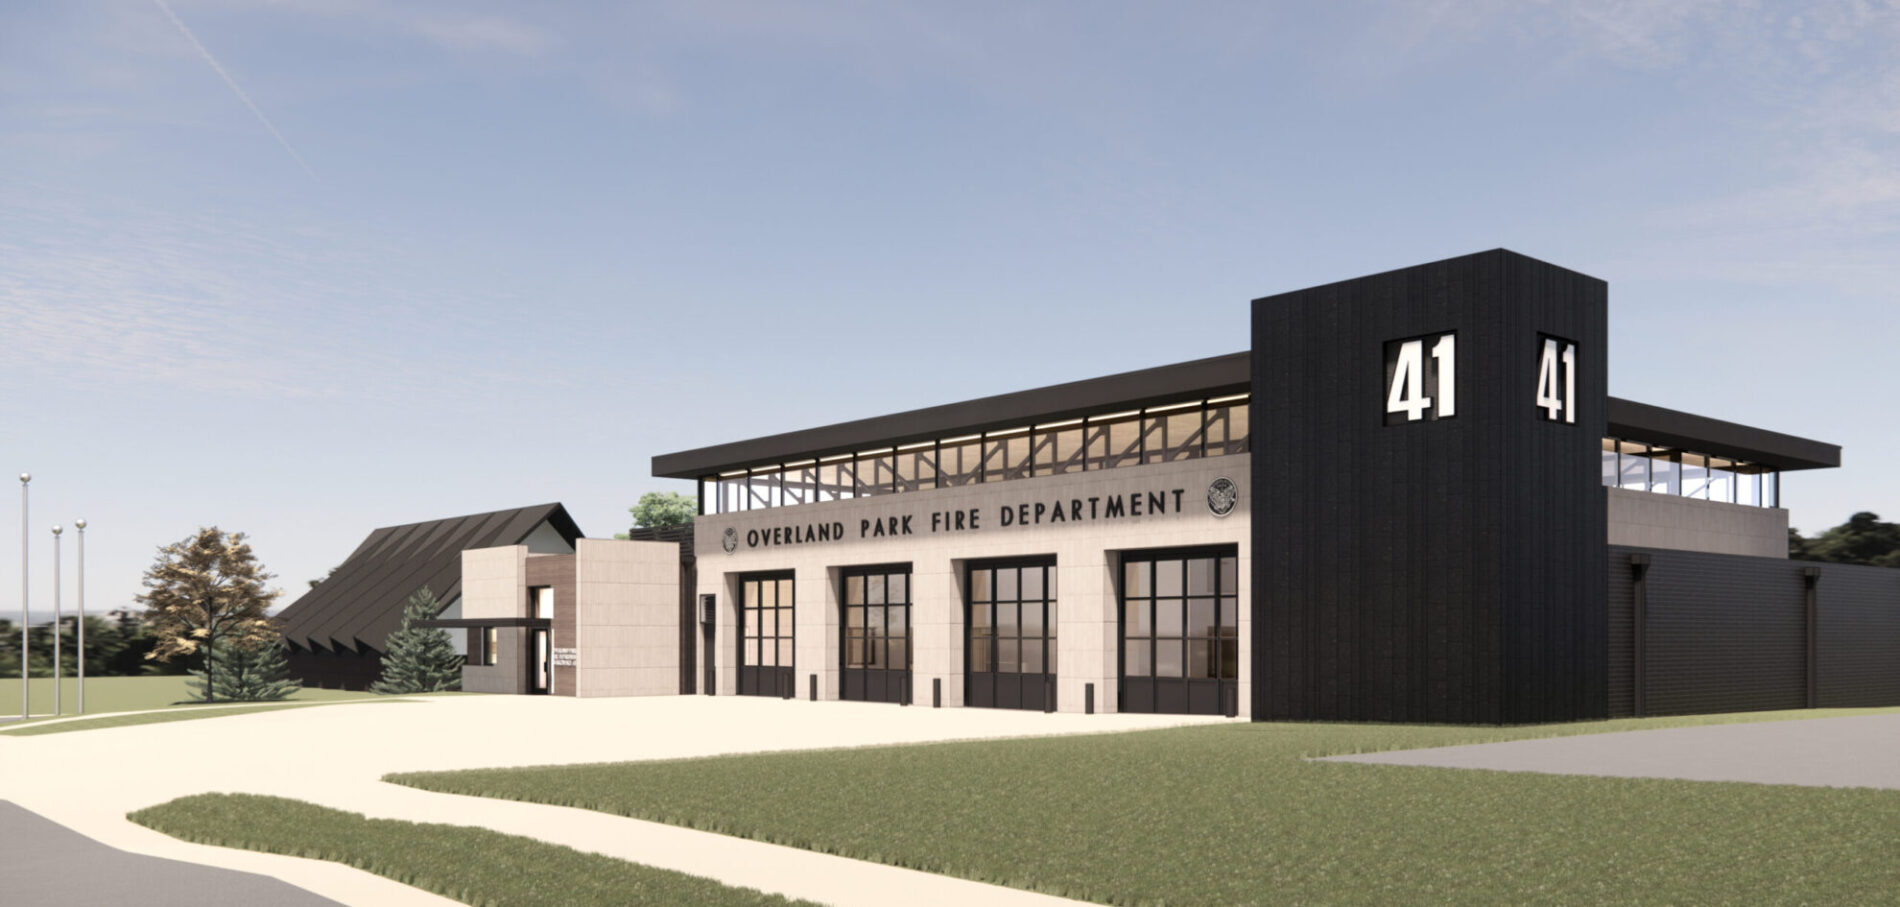 Rendering of Overland Park Fire Station 41, a McCownGordon project.